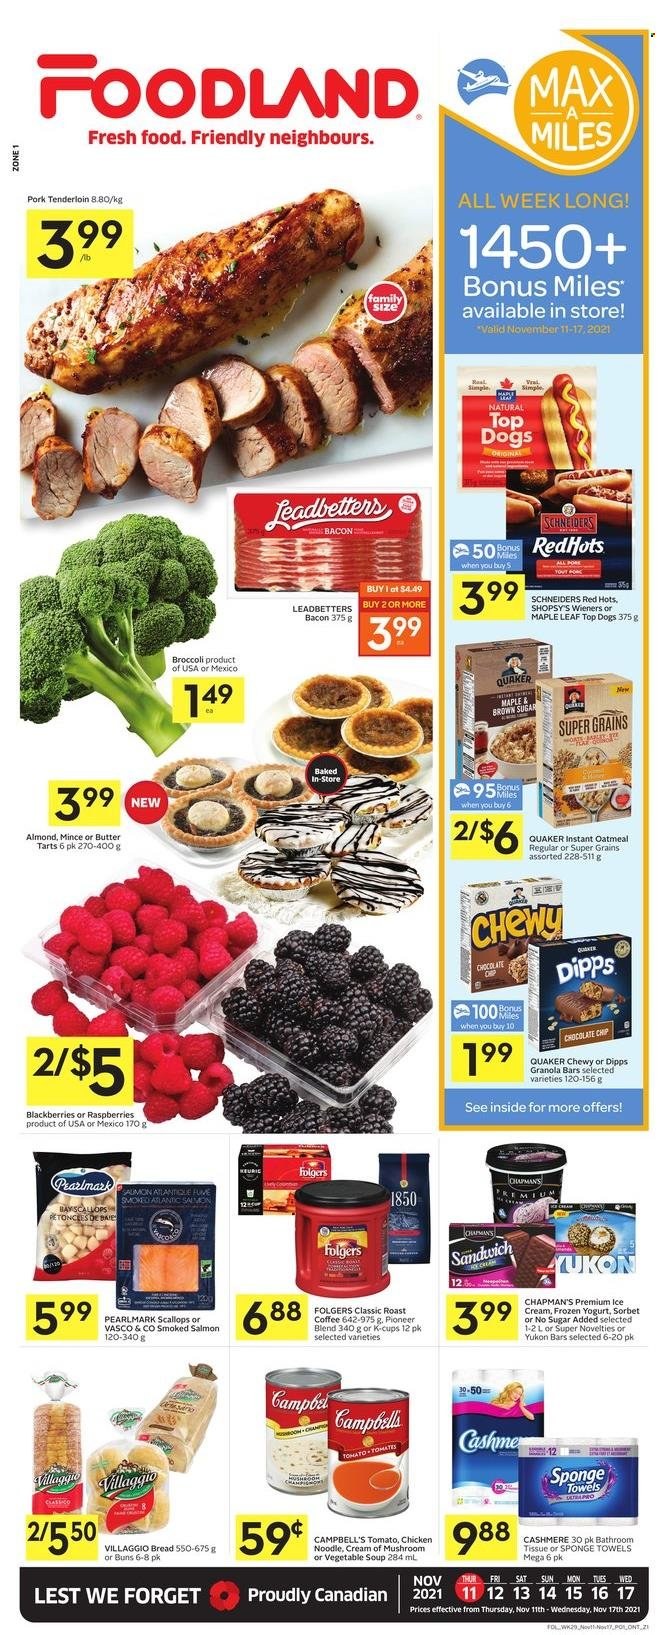 thumbnail - Foodland Flyer - November 11, 2021 - November 17, 2021 - Sales products - bread, buns, broccoli, blackberries, salmon, scallops, smoked salmon, Campbell's, vegetable soup, sandwich, soup, Quaker, noodles, bacon, yoghurt, butter, chocolate chips, oatmeal, granola bar, coffee, Folgers, coffee capsules, K-Cups, pork meat, pork tenderloin. Page 1.